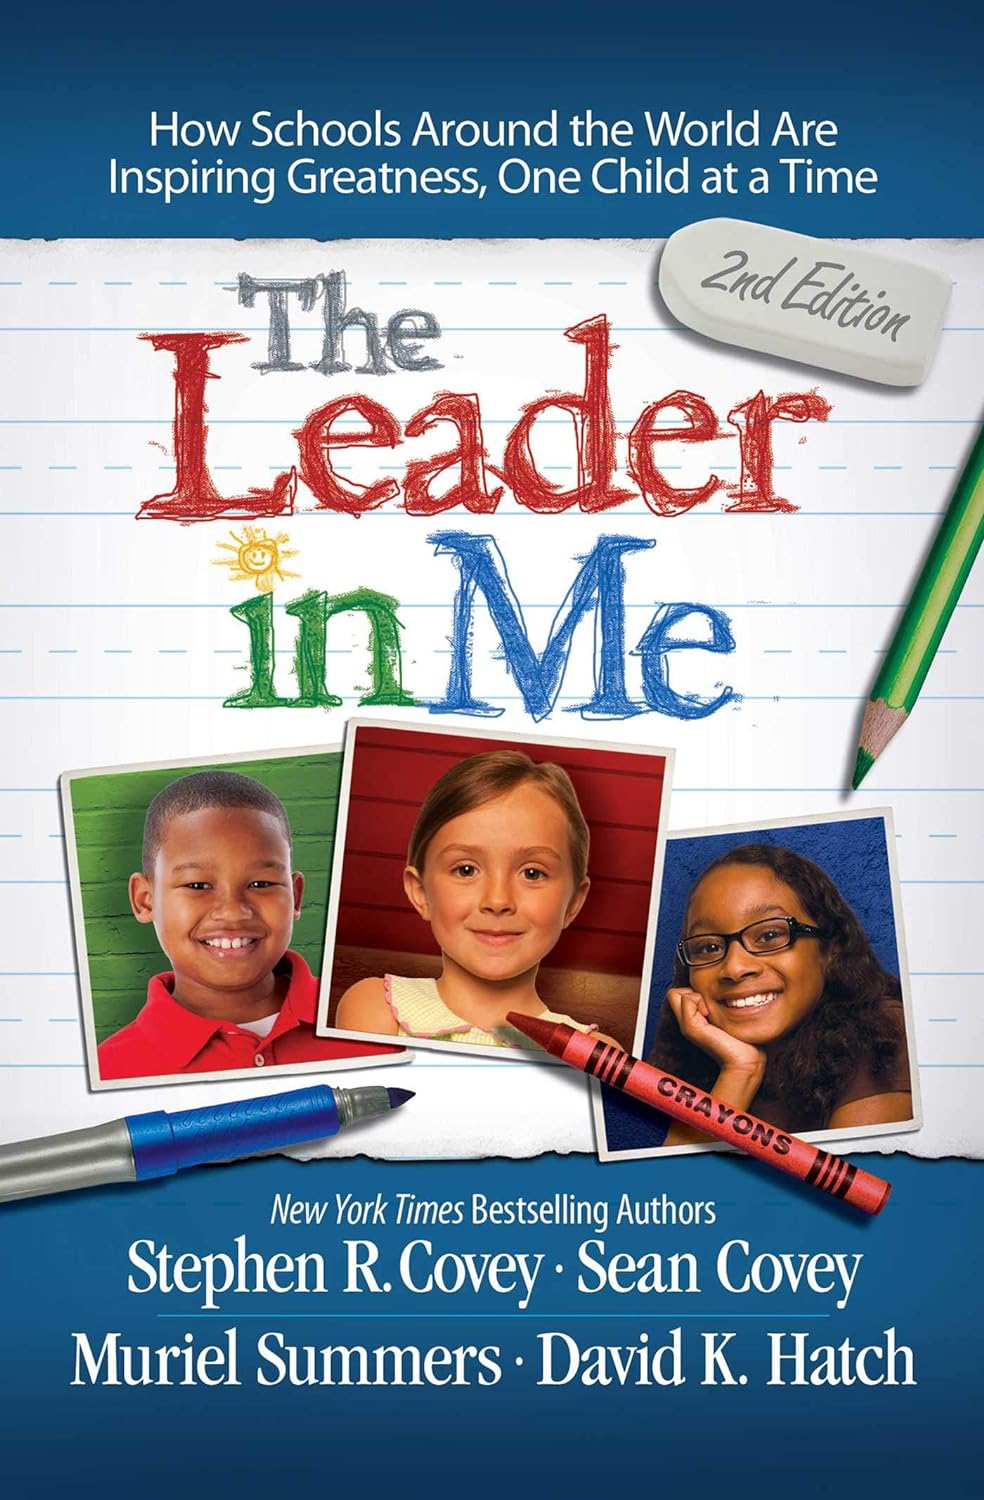 Sách Ngoại Văn - The Leader in Me - How Schools Around the World Are Inspiring Greatness, One Child at a Time (Paperback by STEPHEN R COVEY (Author))